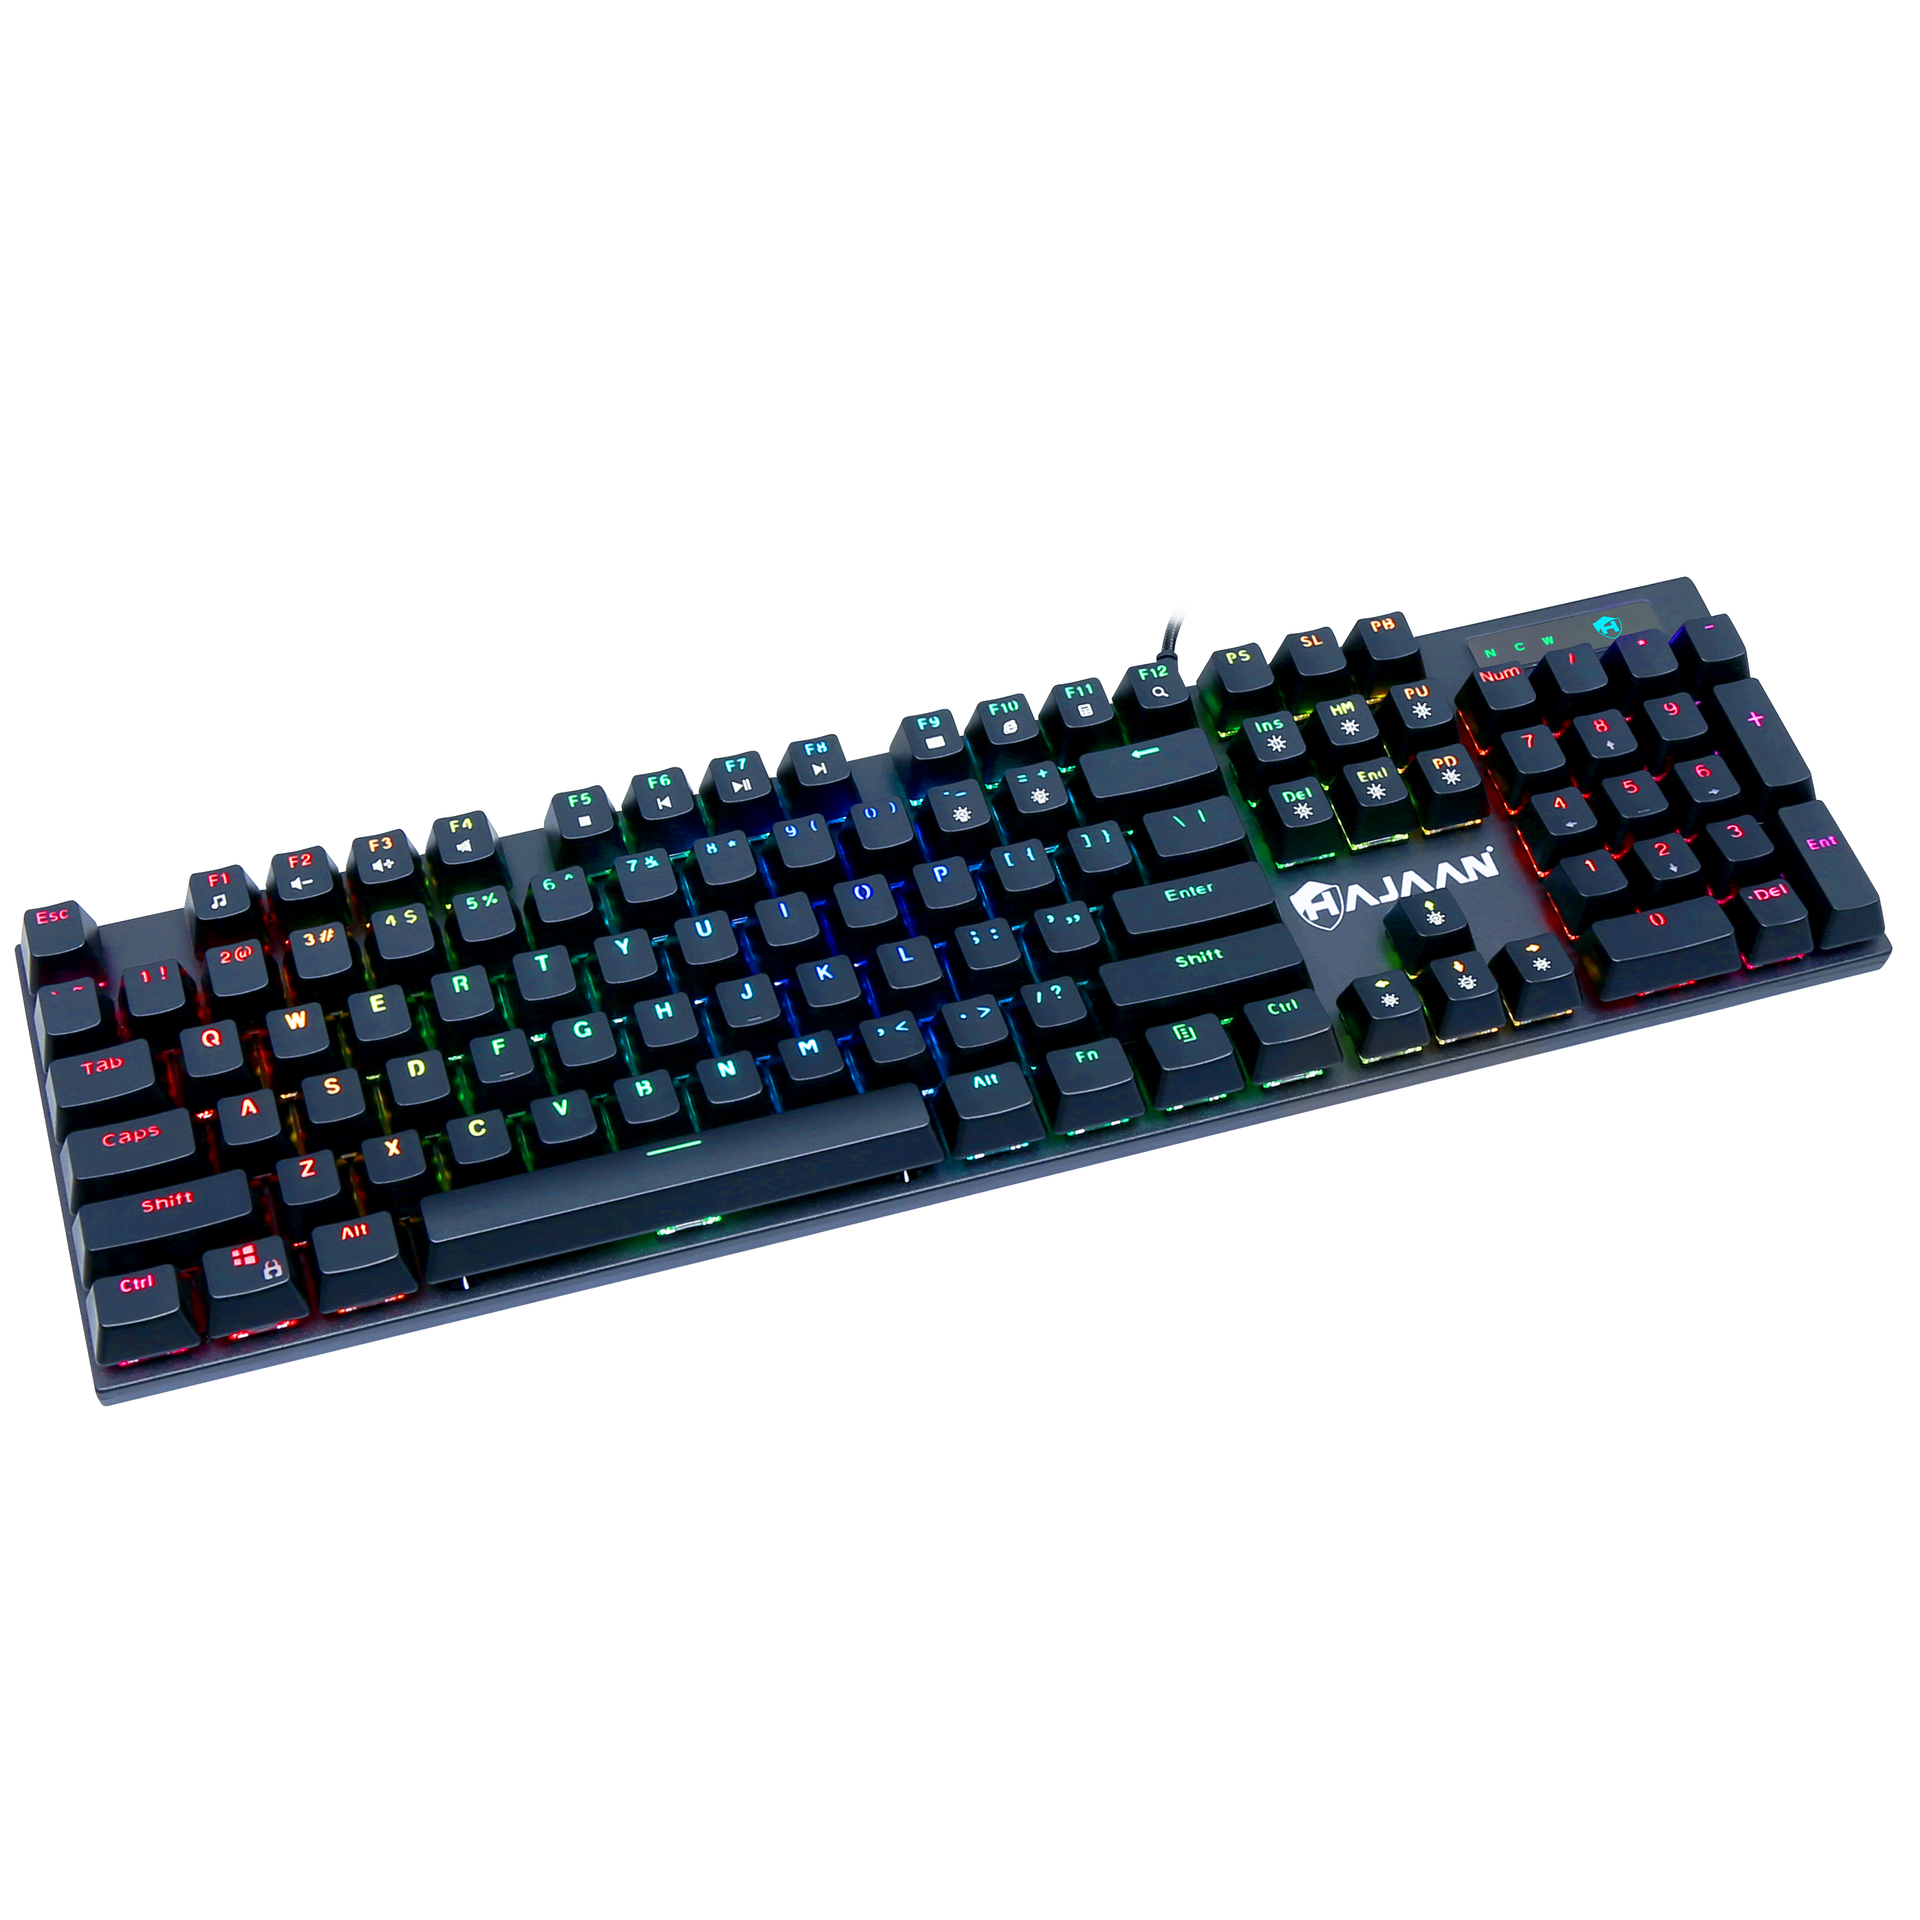 HAJAAN Wired Mechanical Gaming Keyboard and Mouse Combo RGB Backlit Gaming Keyboard with Anti-Ghosting 104 Keys and Blue Switch, RGB Gaming Mouse Up to 7200 DPI for Windows PC Gamers - (Black)